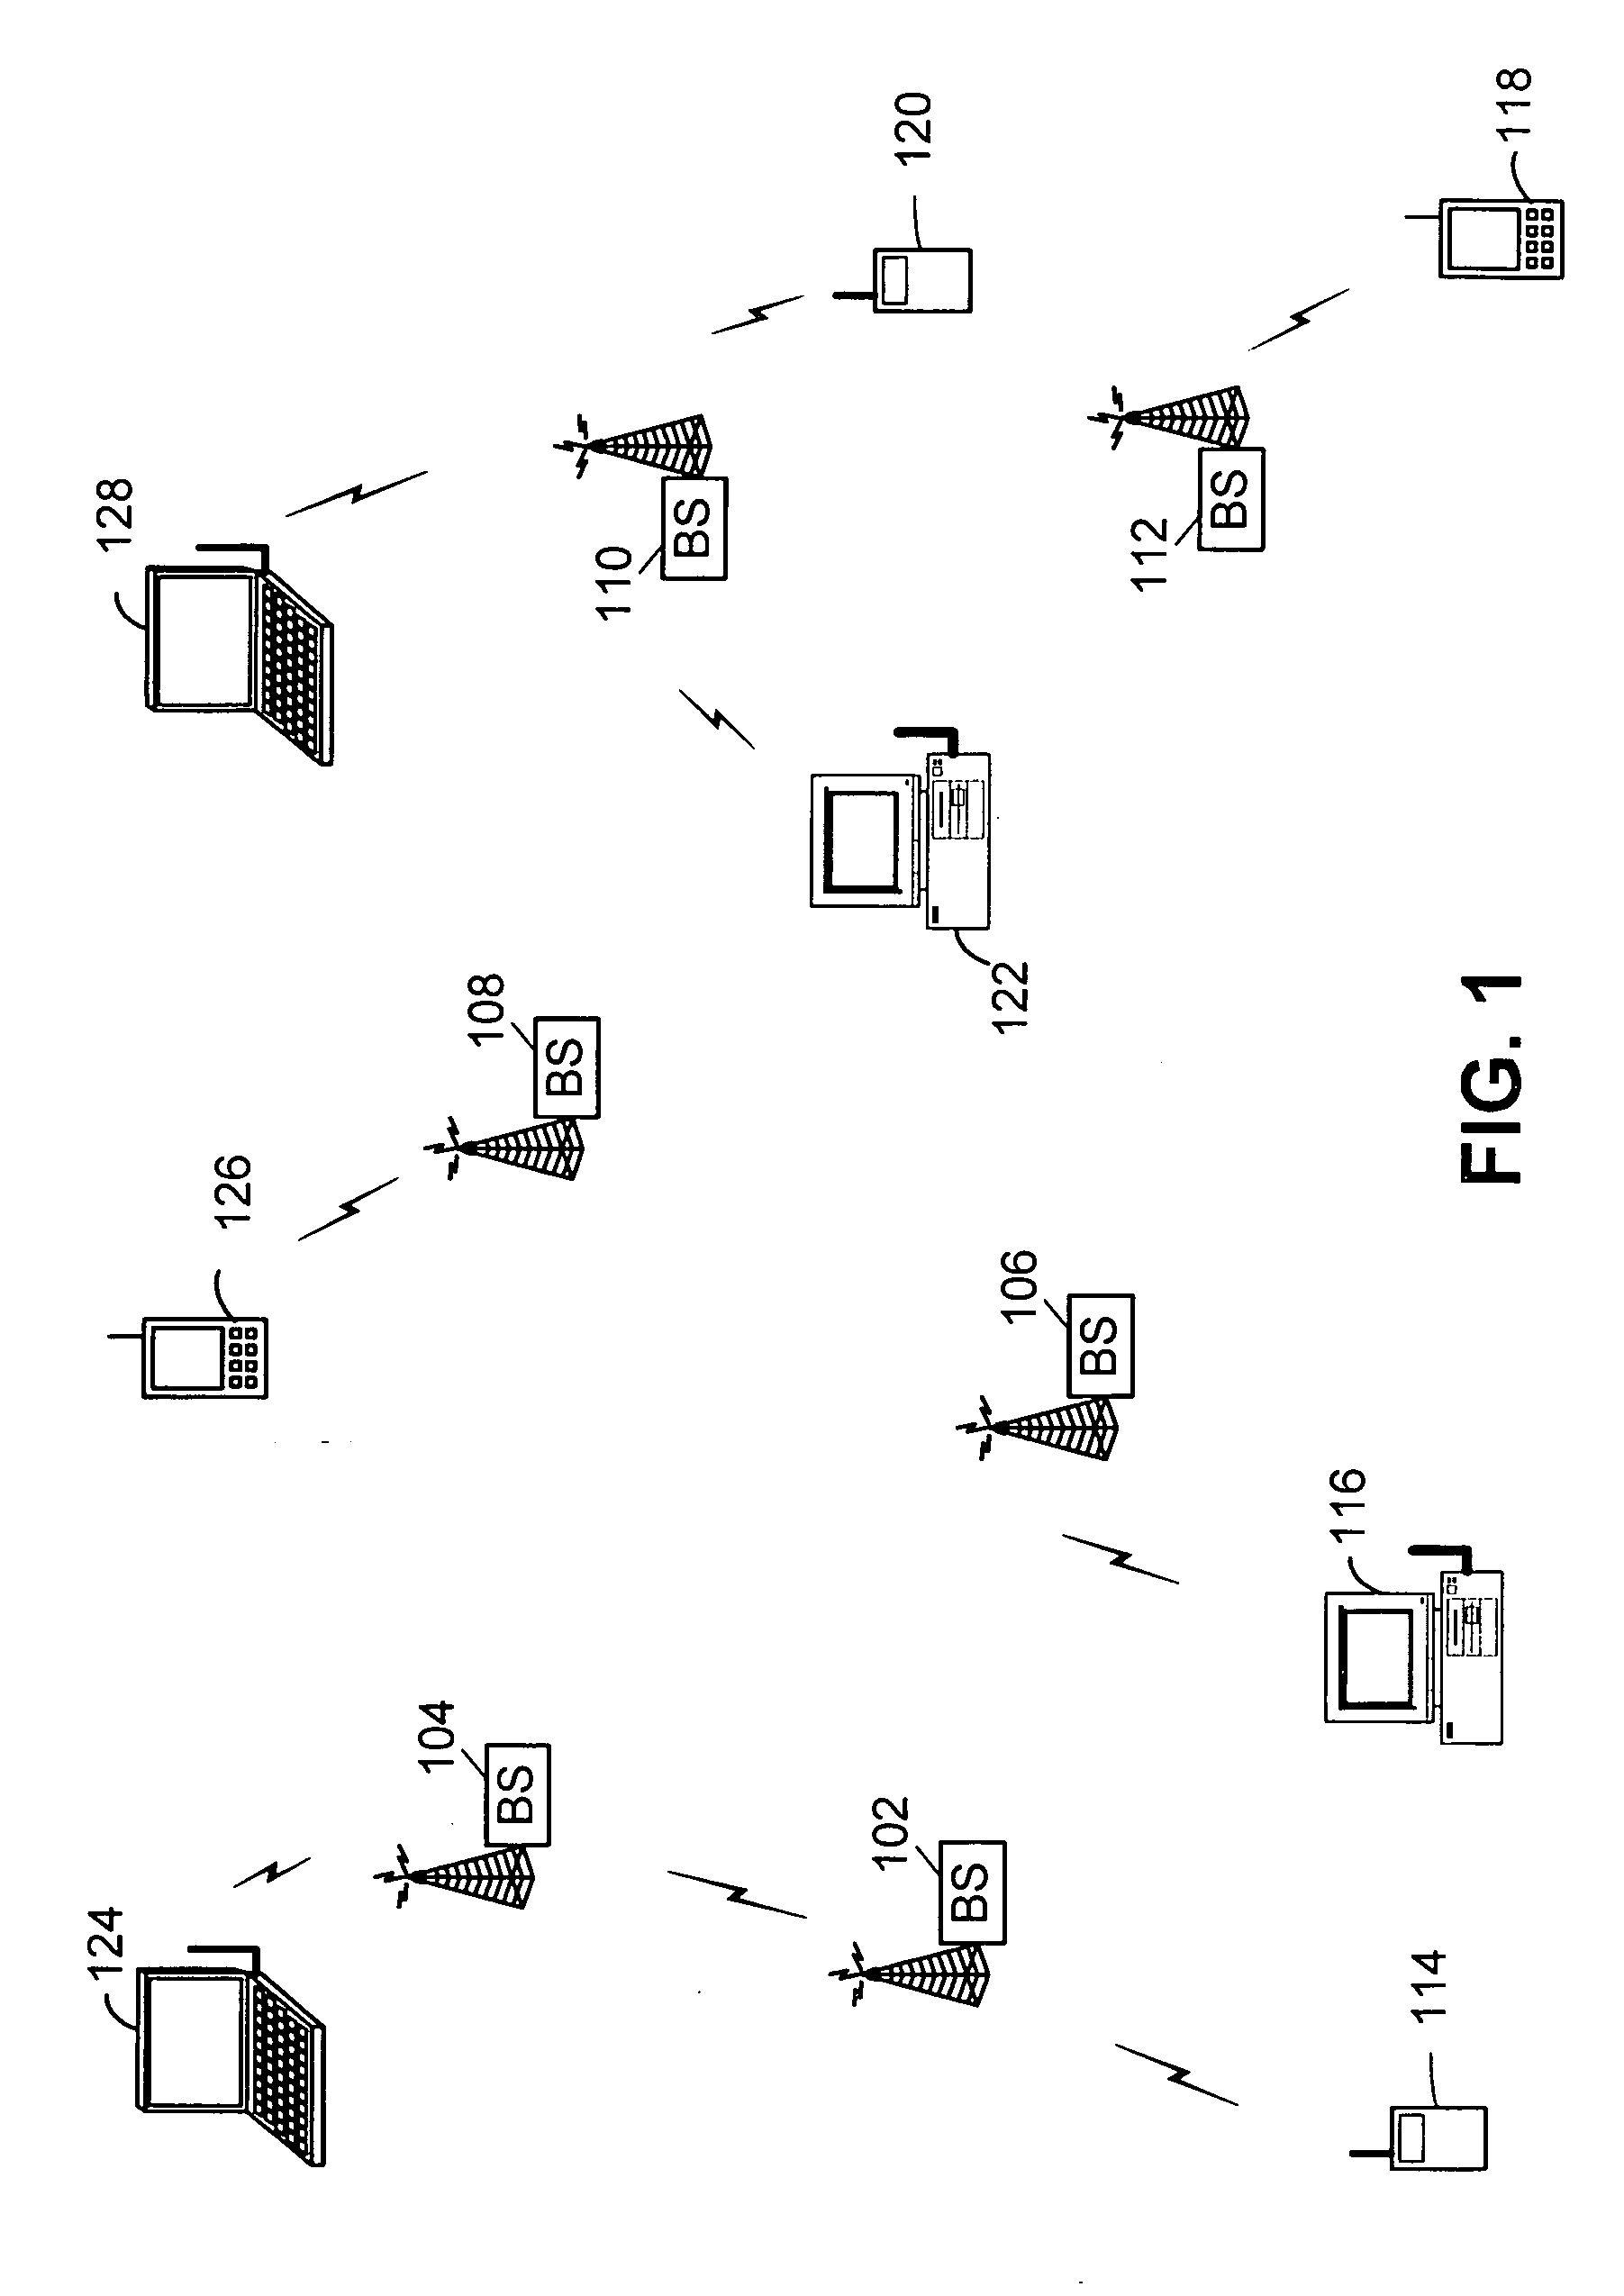 LNA gain adjustment in an RF receiver to compensate for intermodulation interference